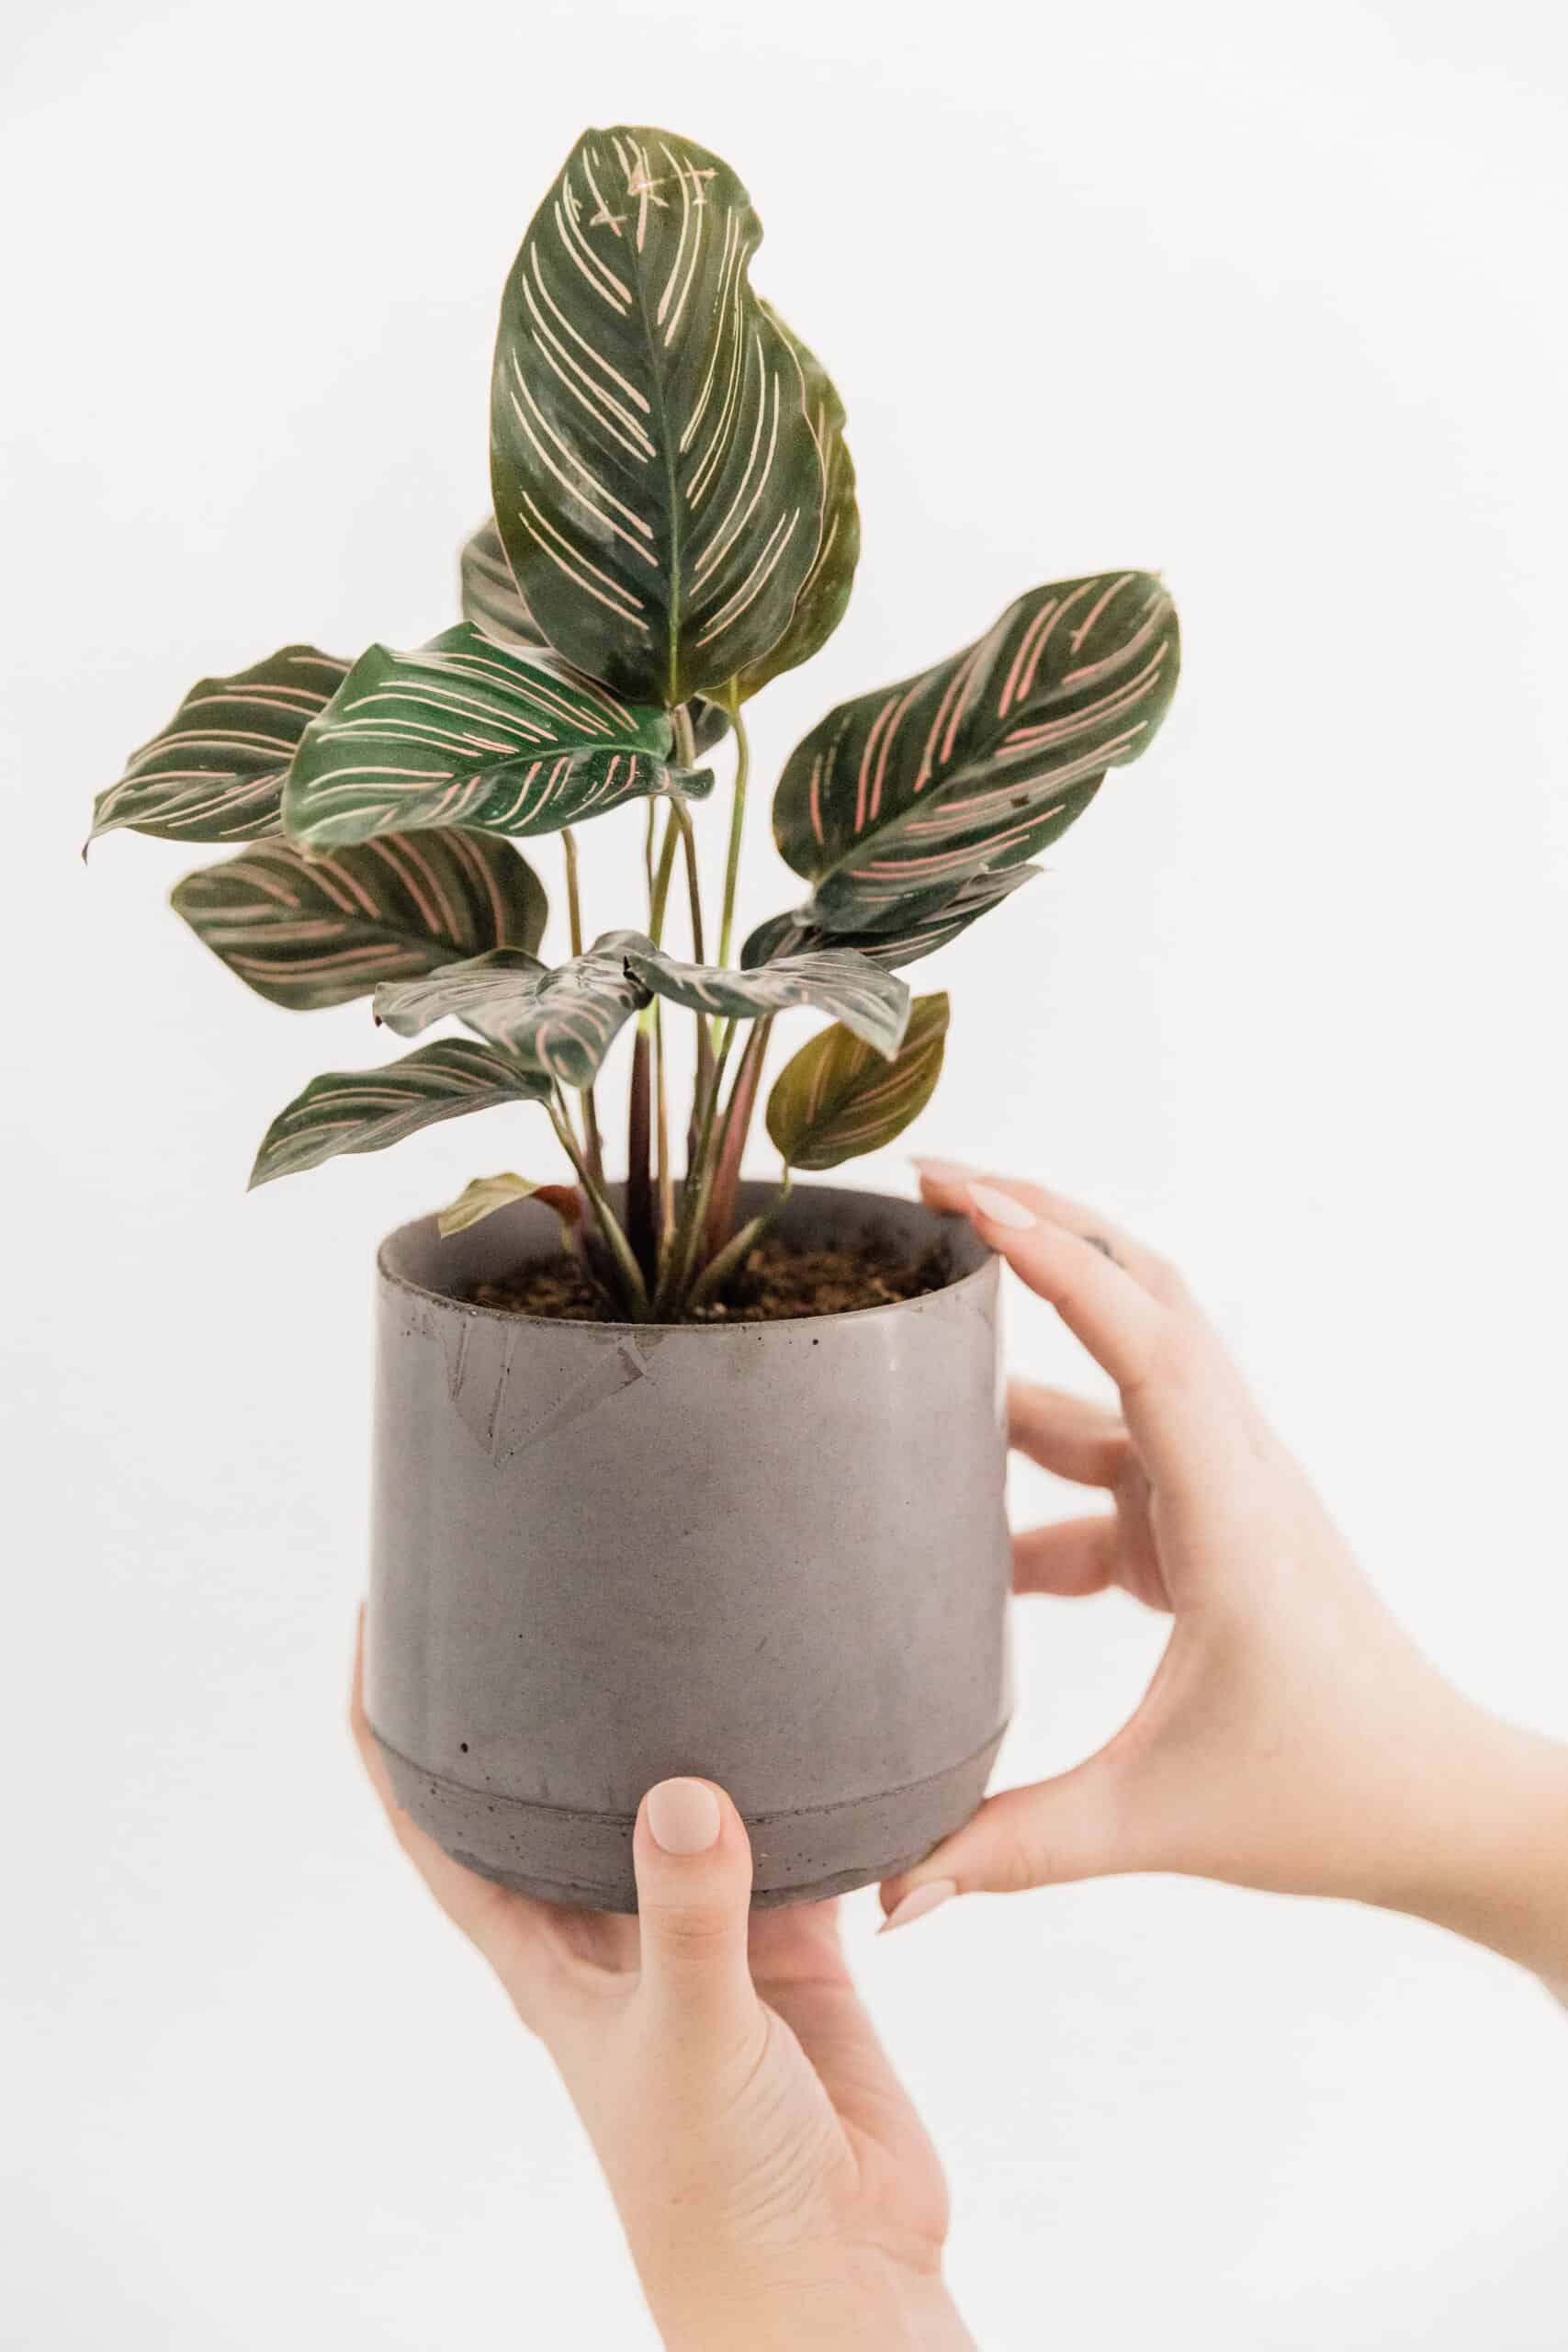 Hands hold up a pin stripped plant in a gray vase demonstrating plant care tips for new plant owners.